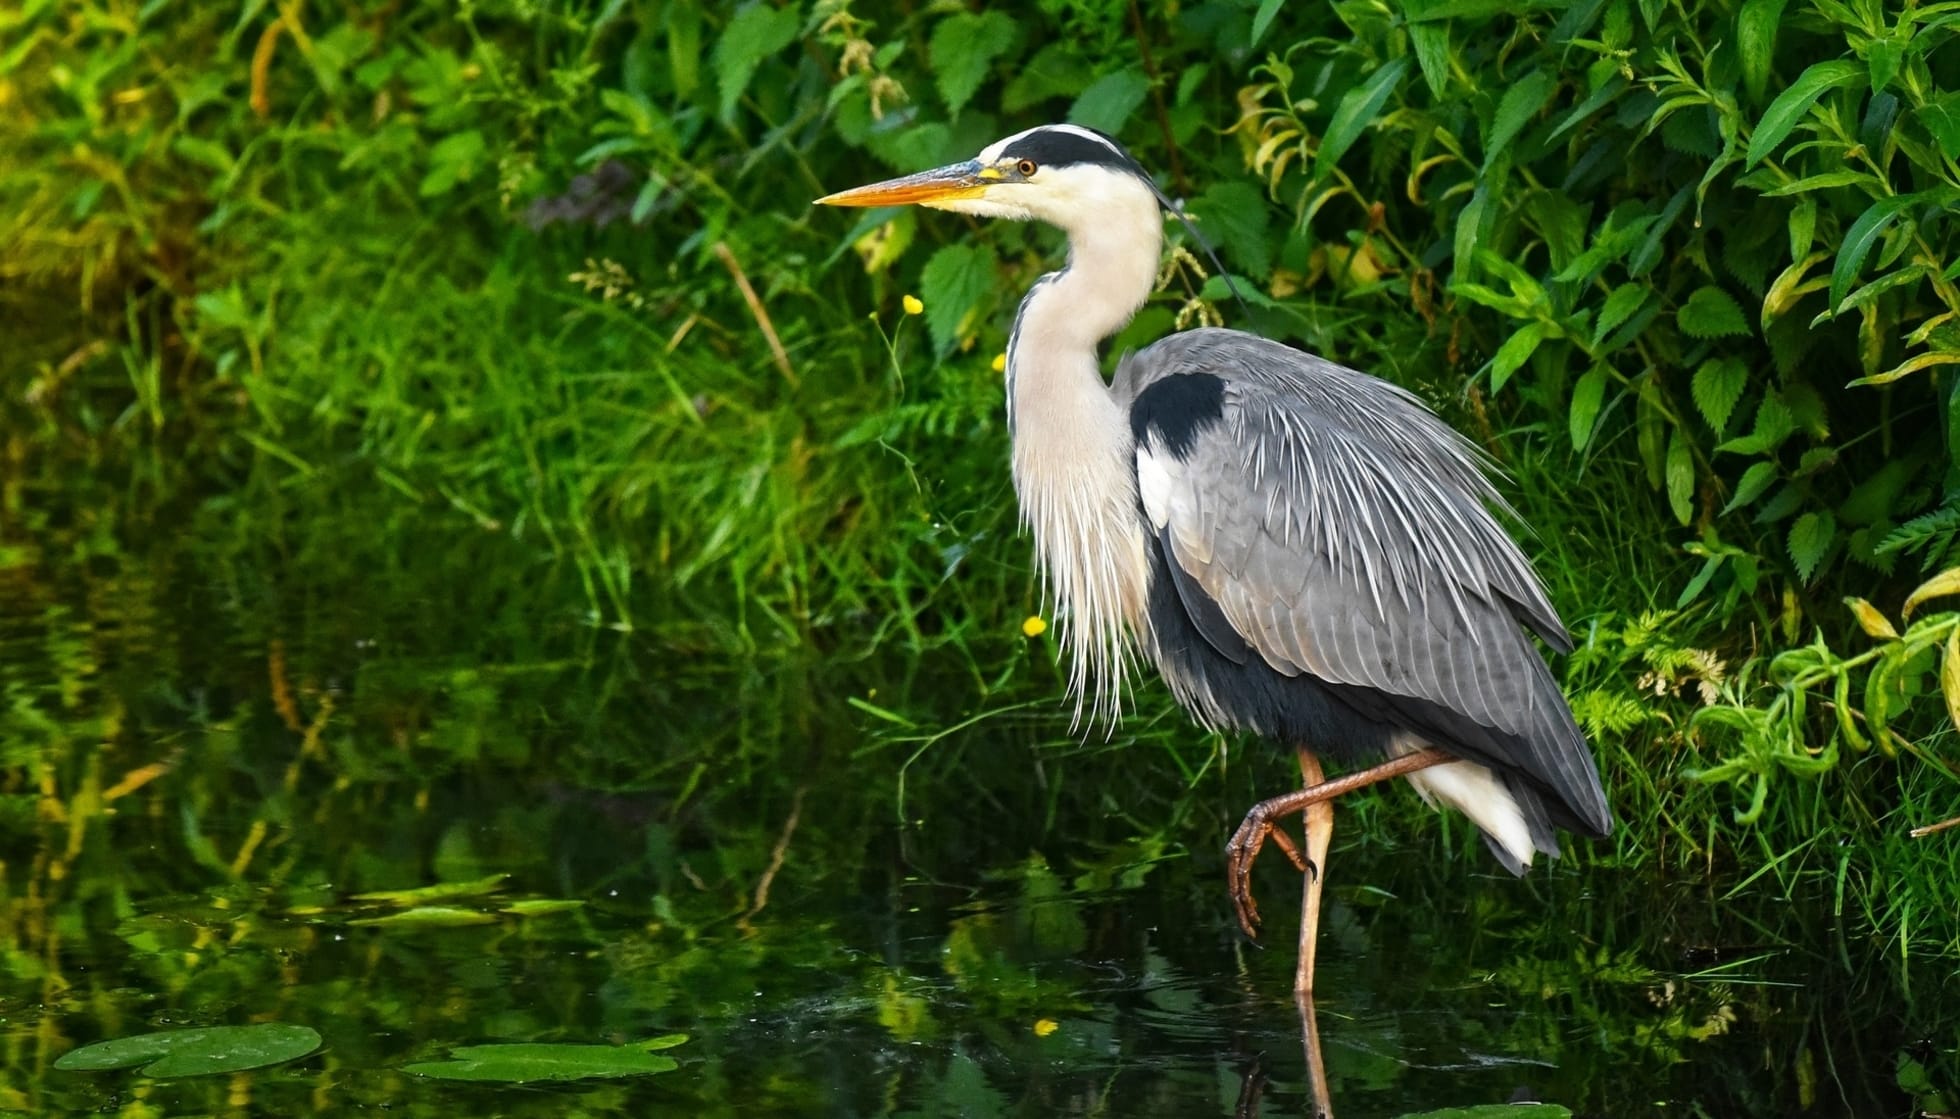 Here are some grey heron facts that kids will find interesting.